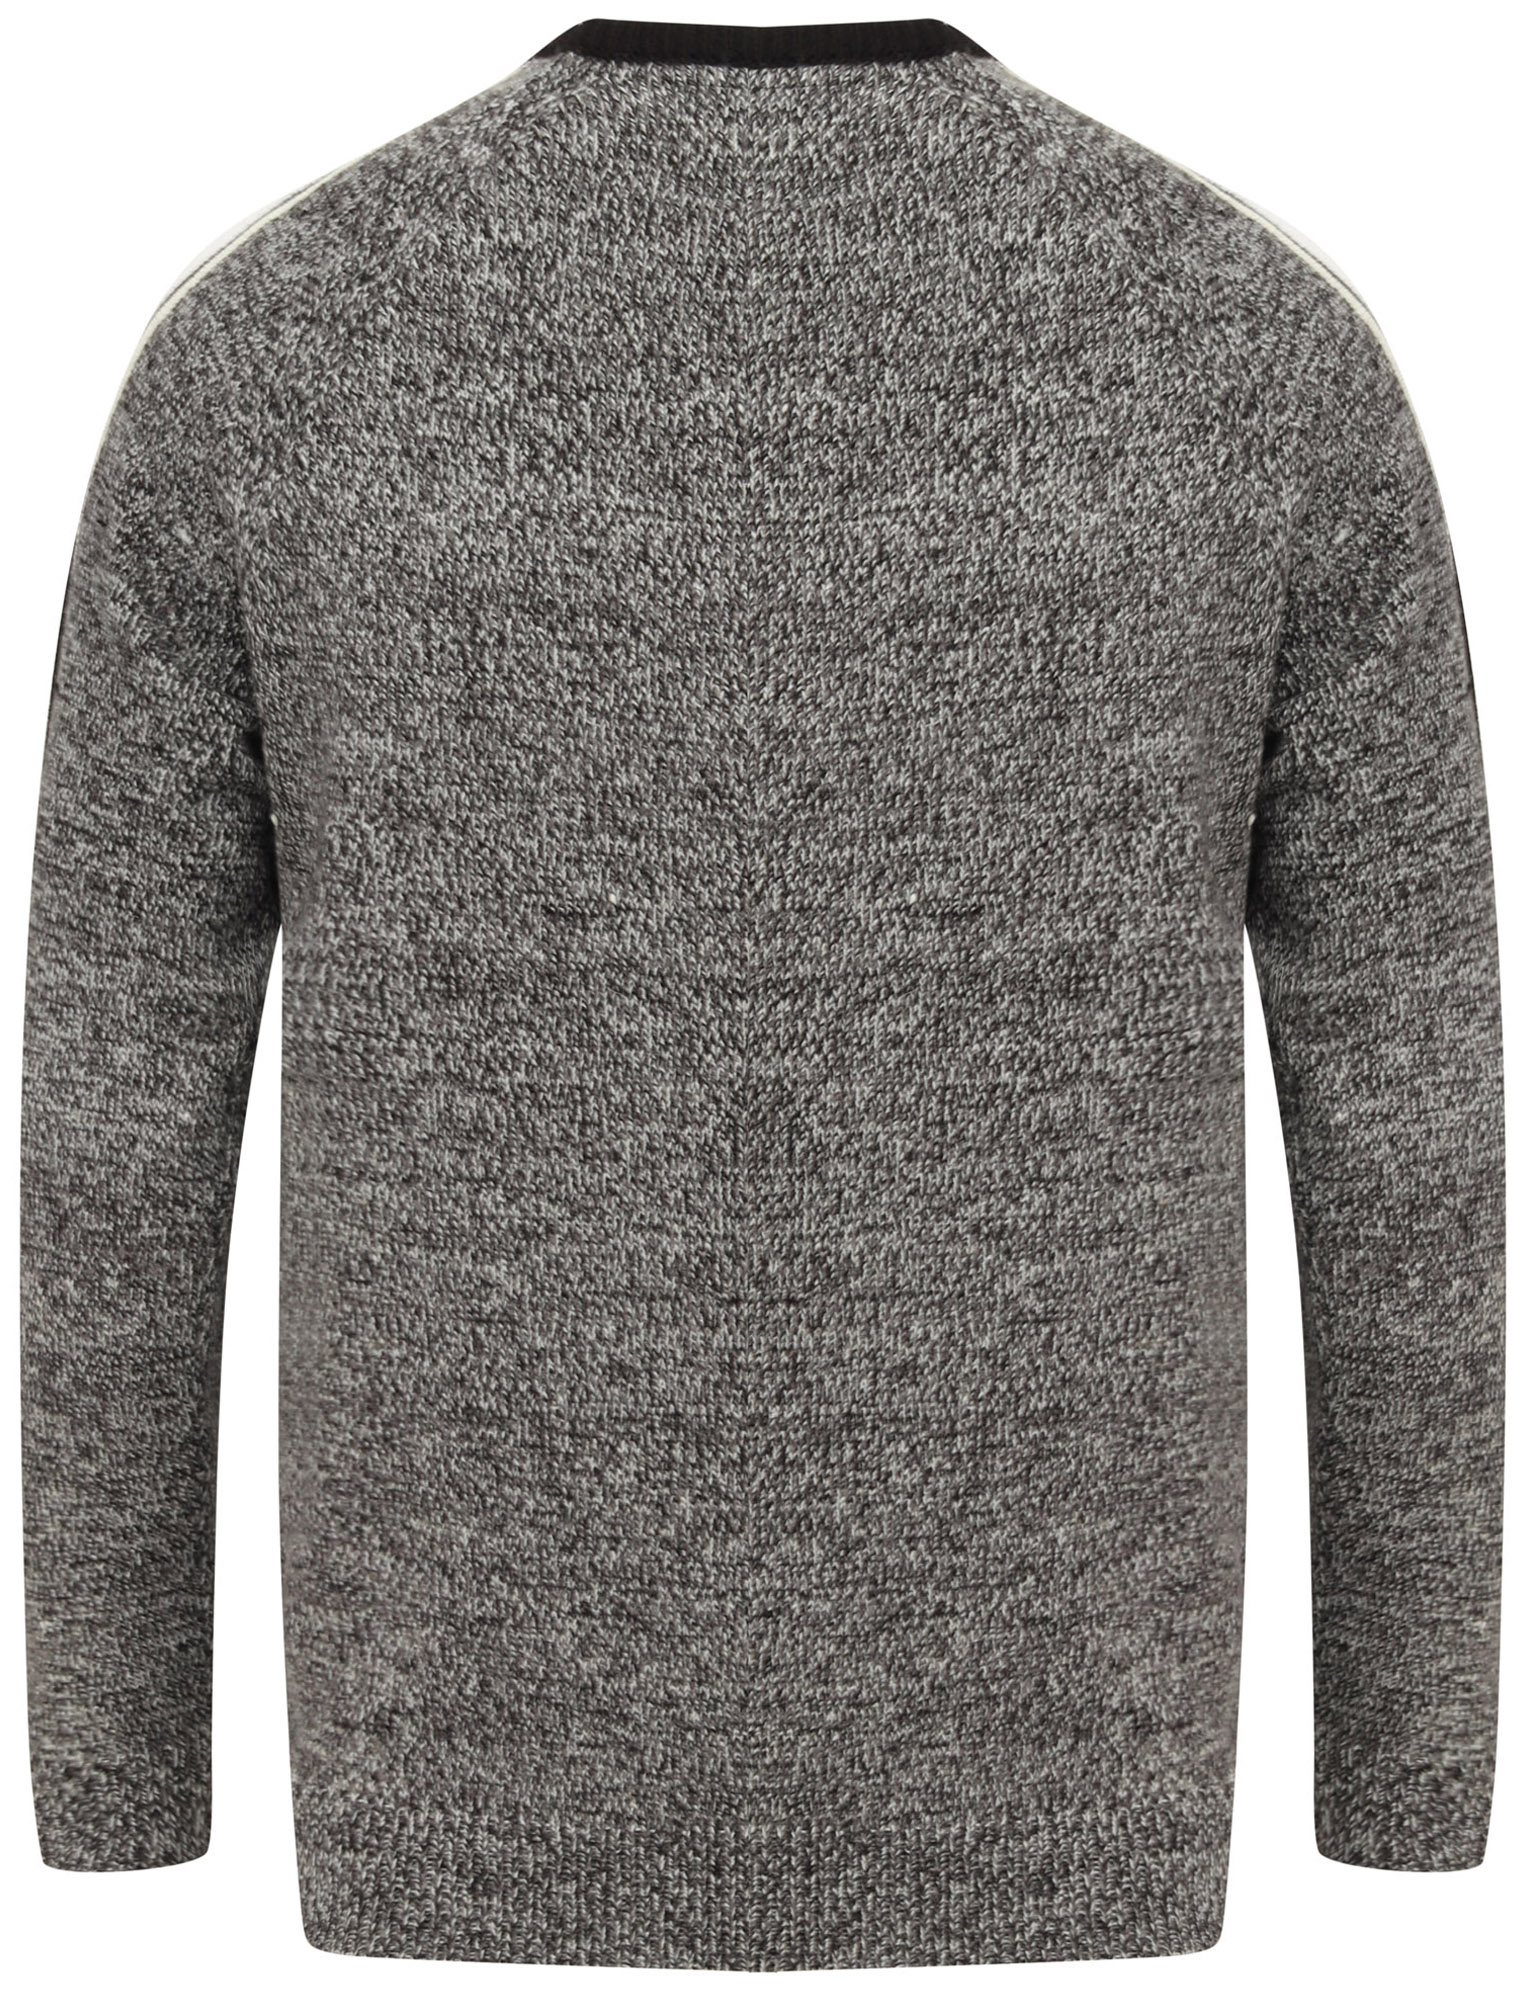 Tokyo Laundry Mens Jumper Wool Mix Crew Neck Knitted Sweater Top ...